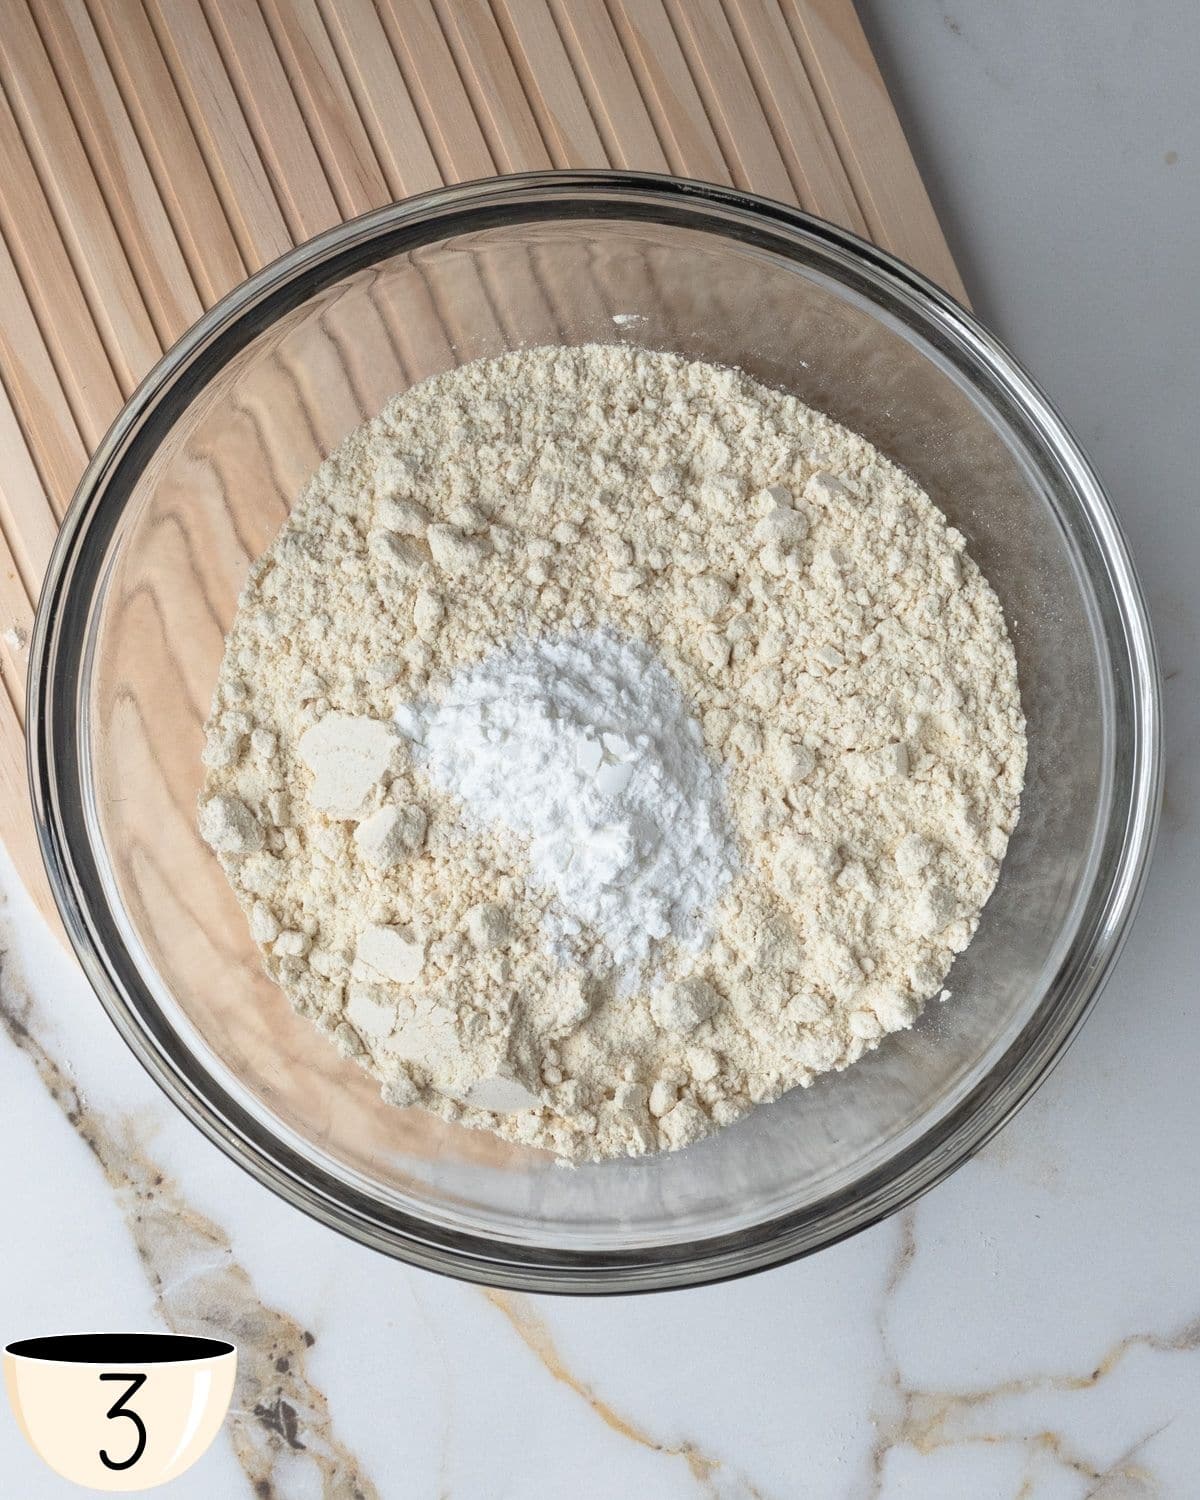 A clear glass bowl containing gluten-free all-purpose flour, baking powder, and salt ready for mixing.